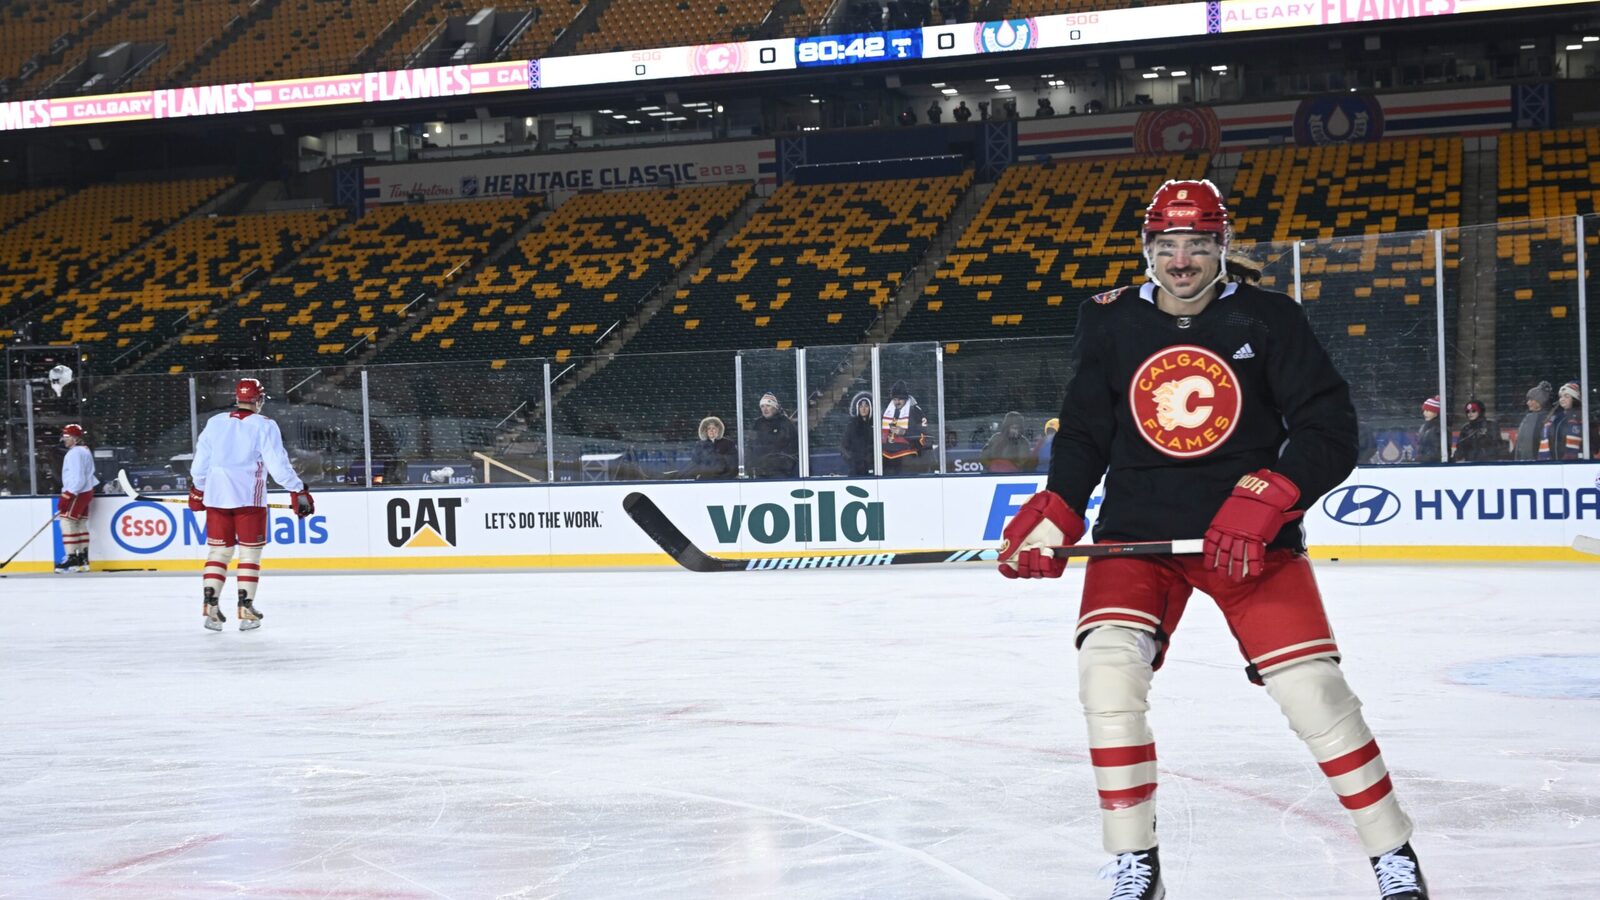 Revisiting the Calgary Flames' first chilly outdoor game